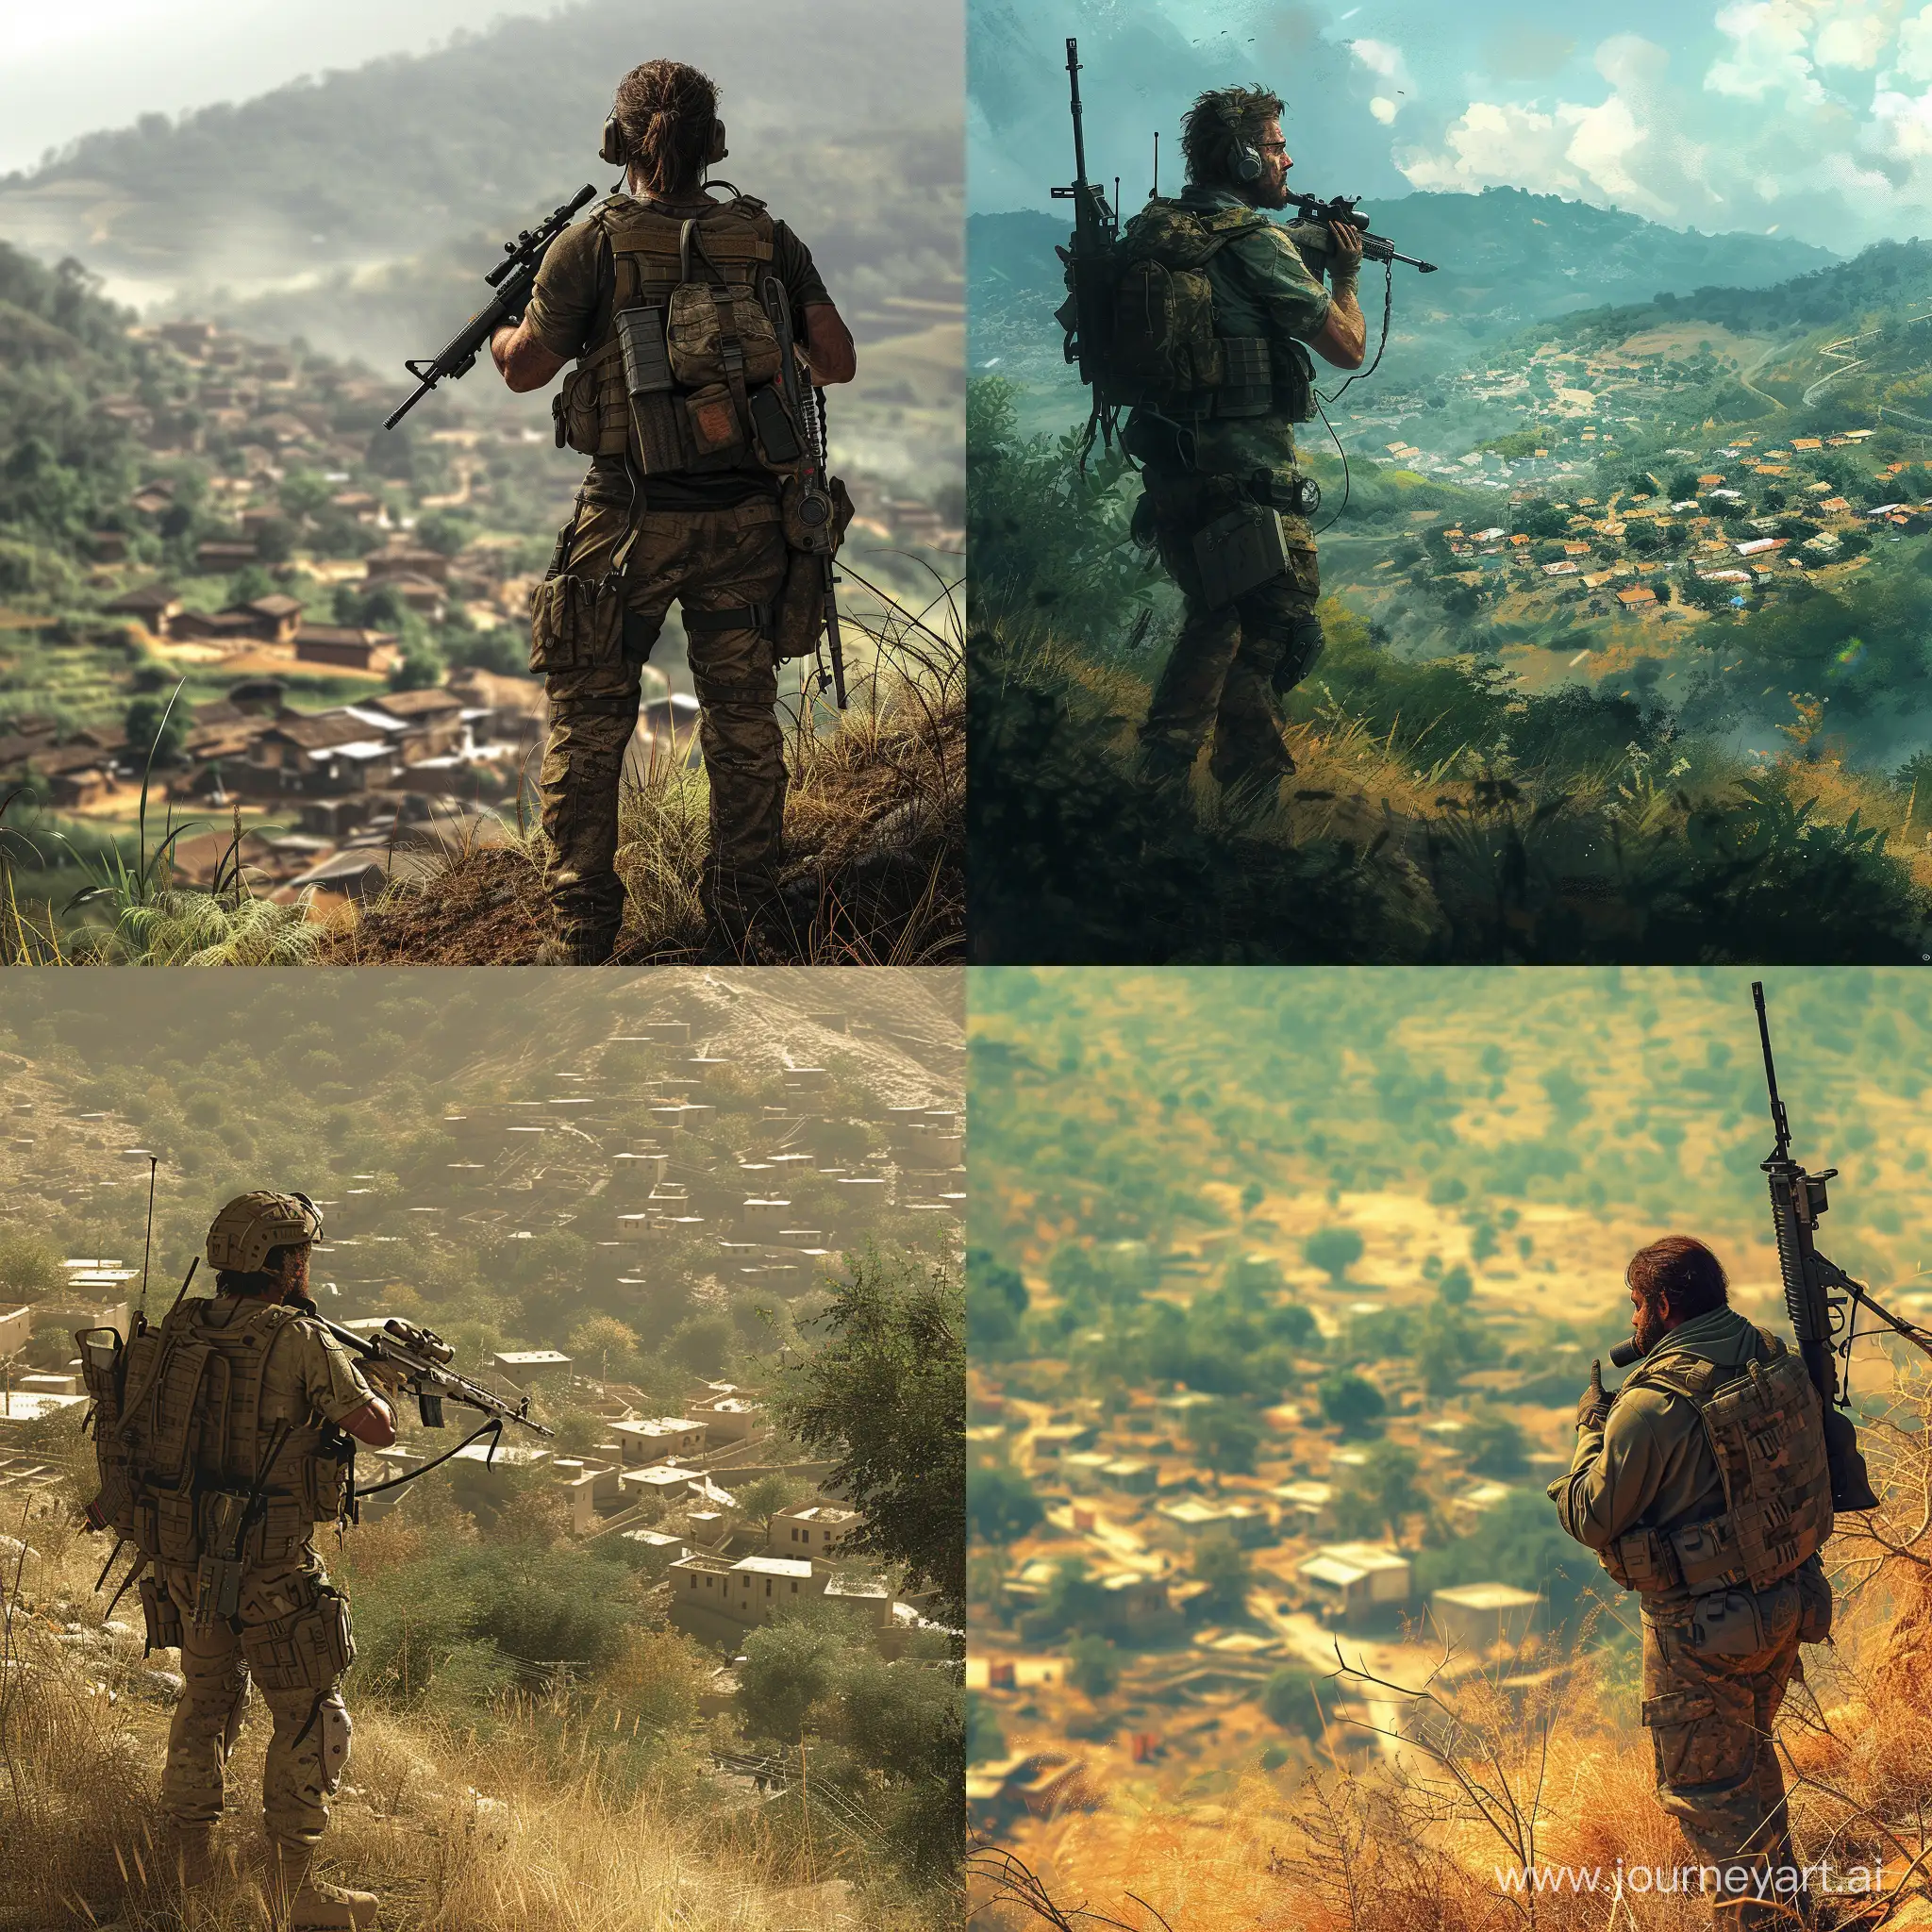 Experienced-Survivalist-in-Military-Gear-Observing-Village-from-Hilltop